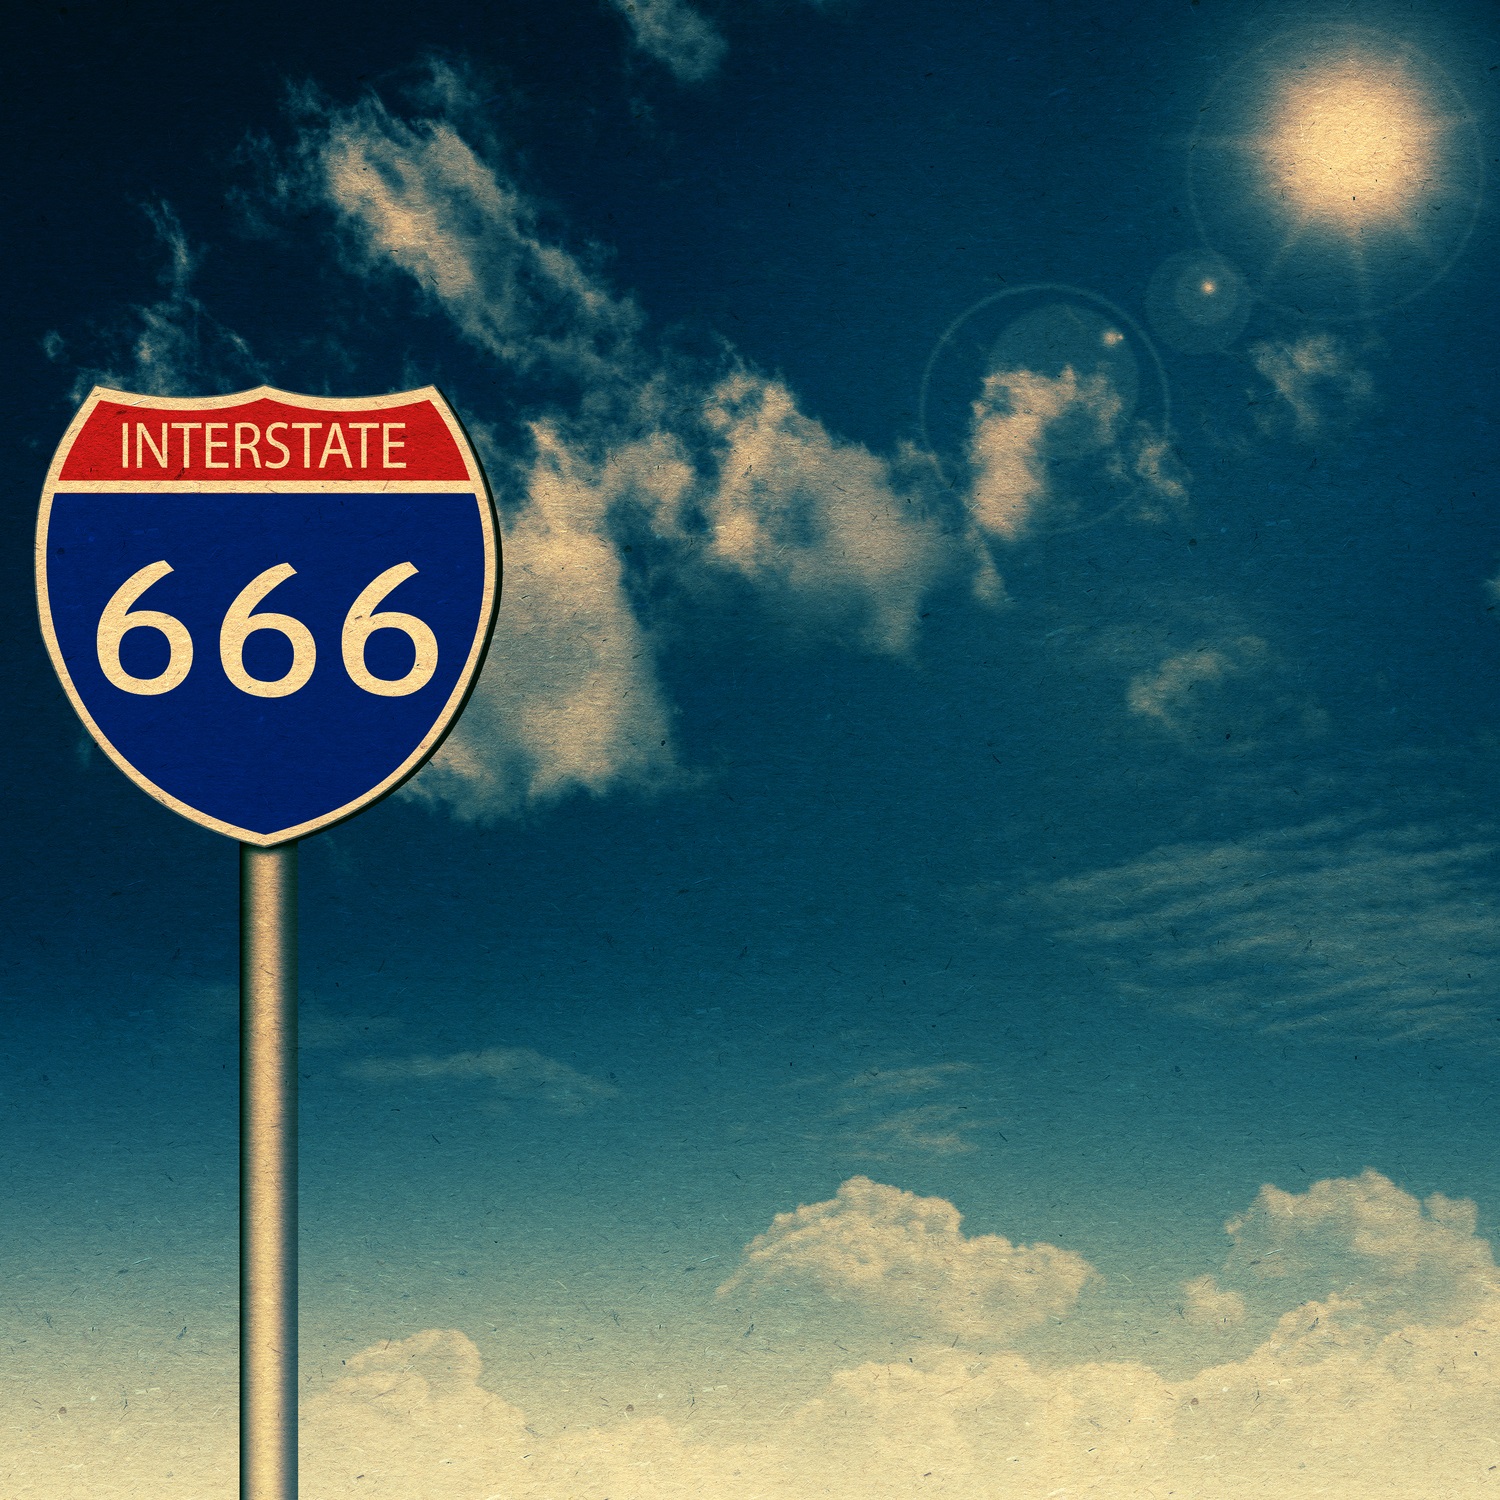 Angel Number 666 Meaning - Road Sign Interstate 666